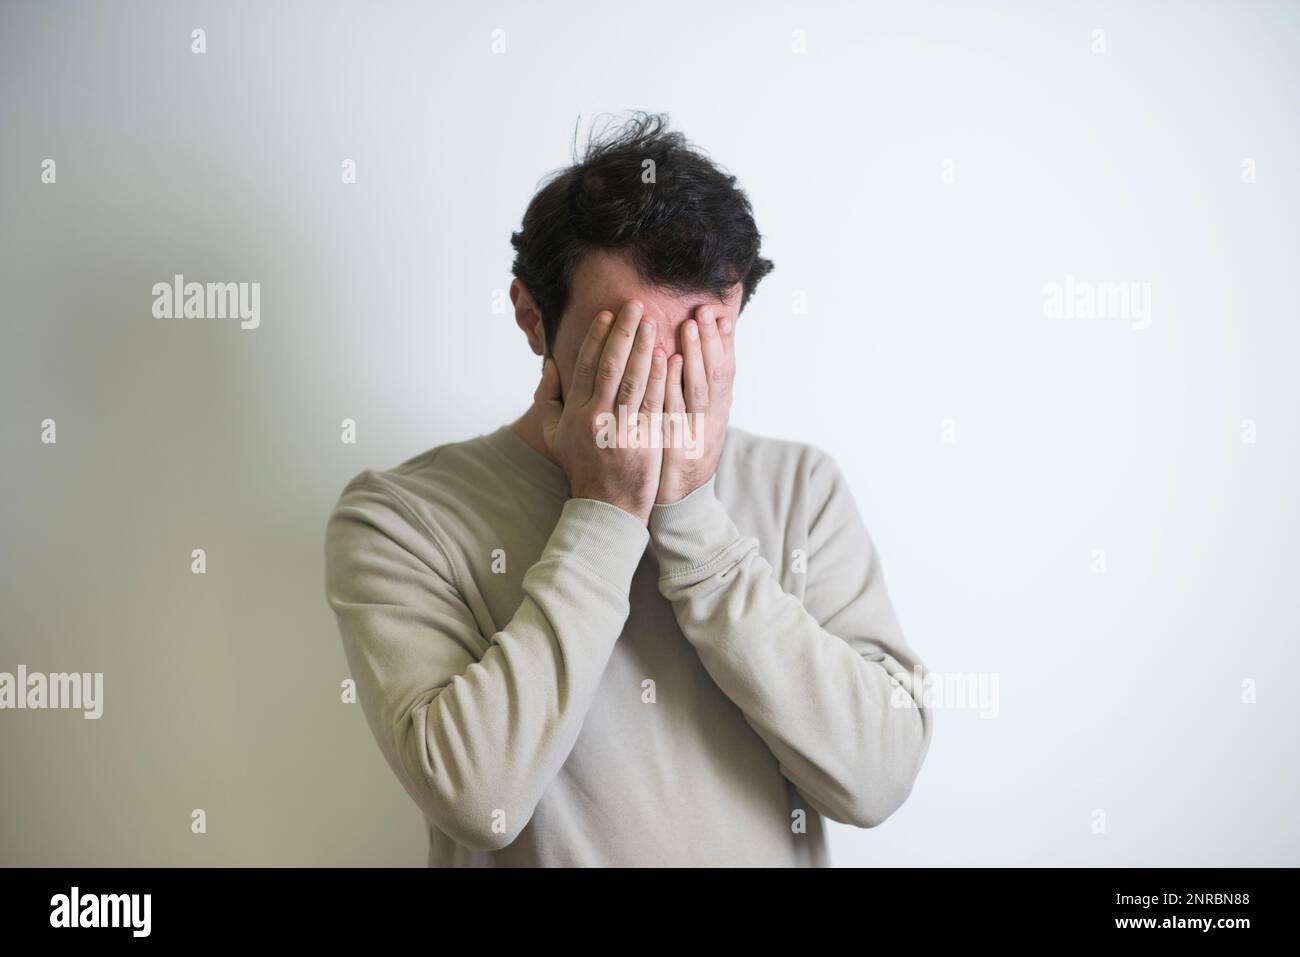 Man hiding face in hands crying Stock Photo